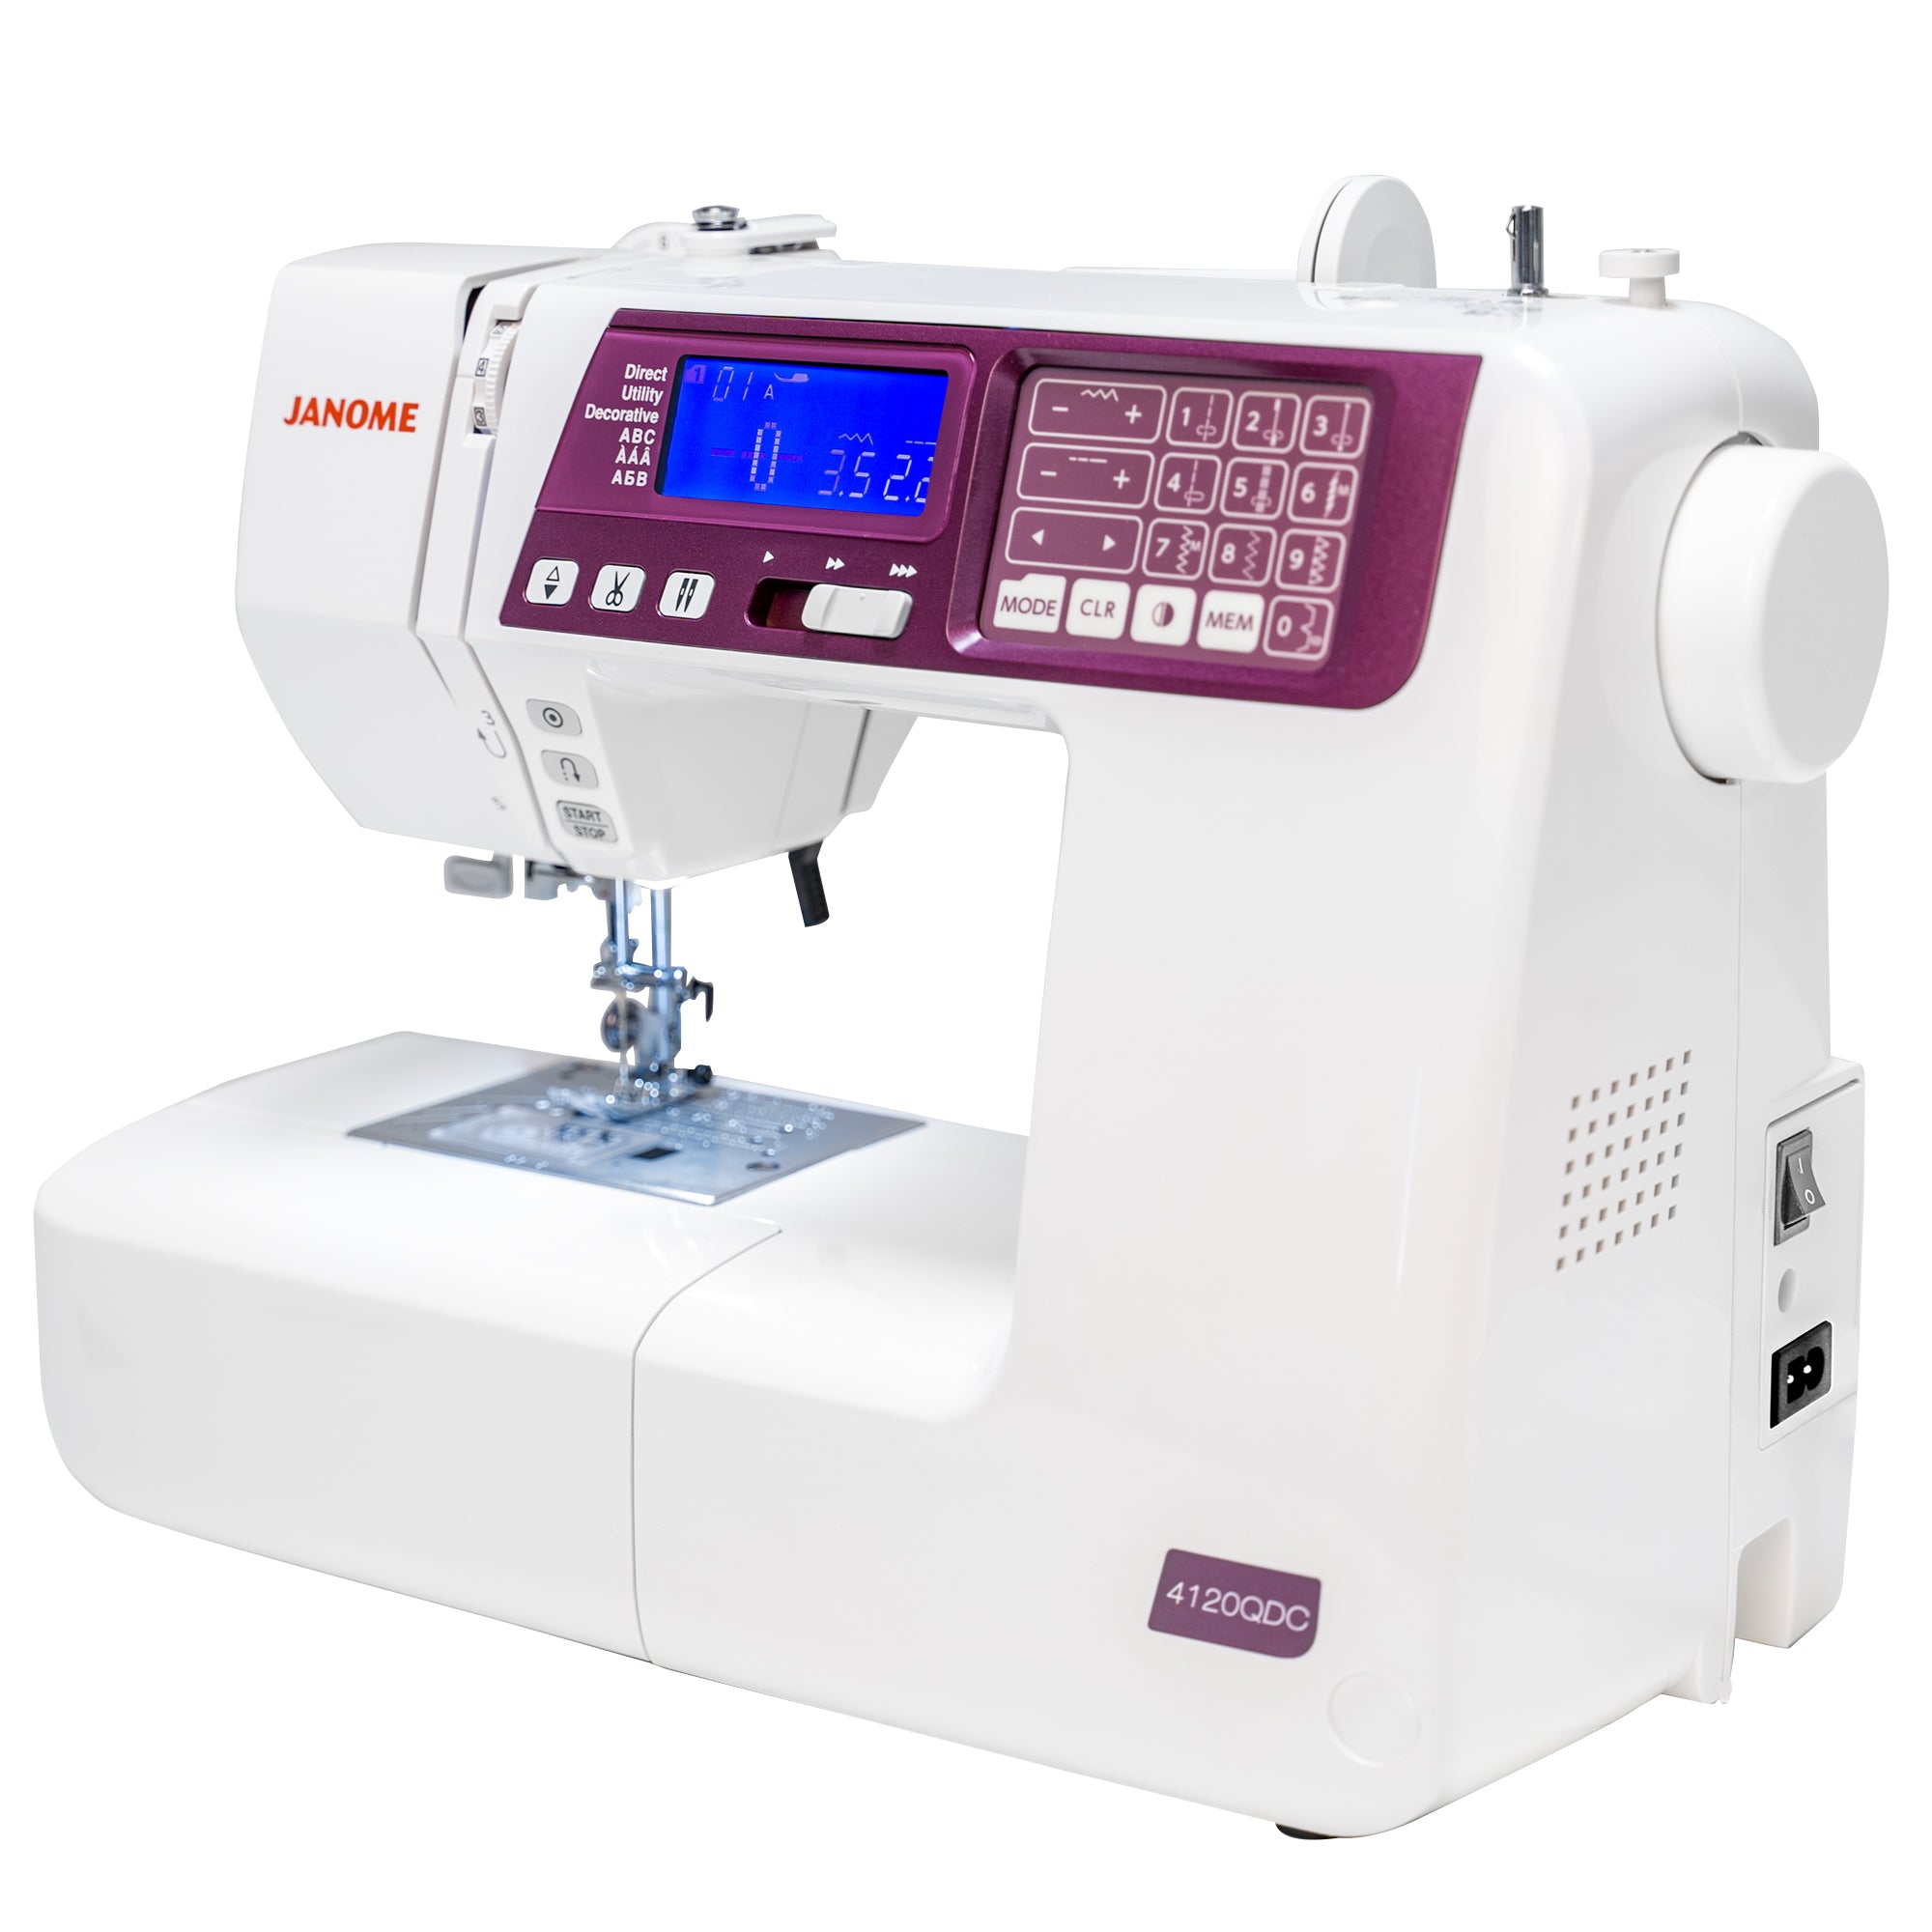 angled image of the Janome 4120QDC-G Sewing and Quilting Machine